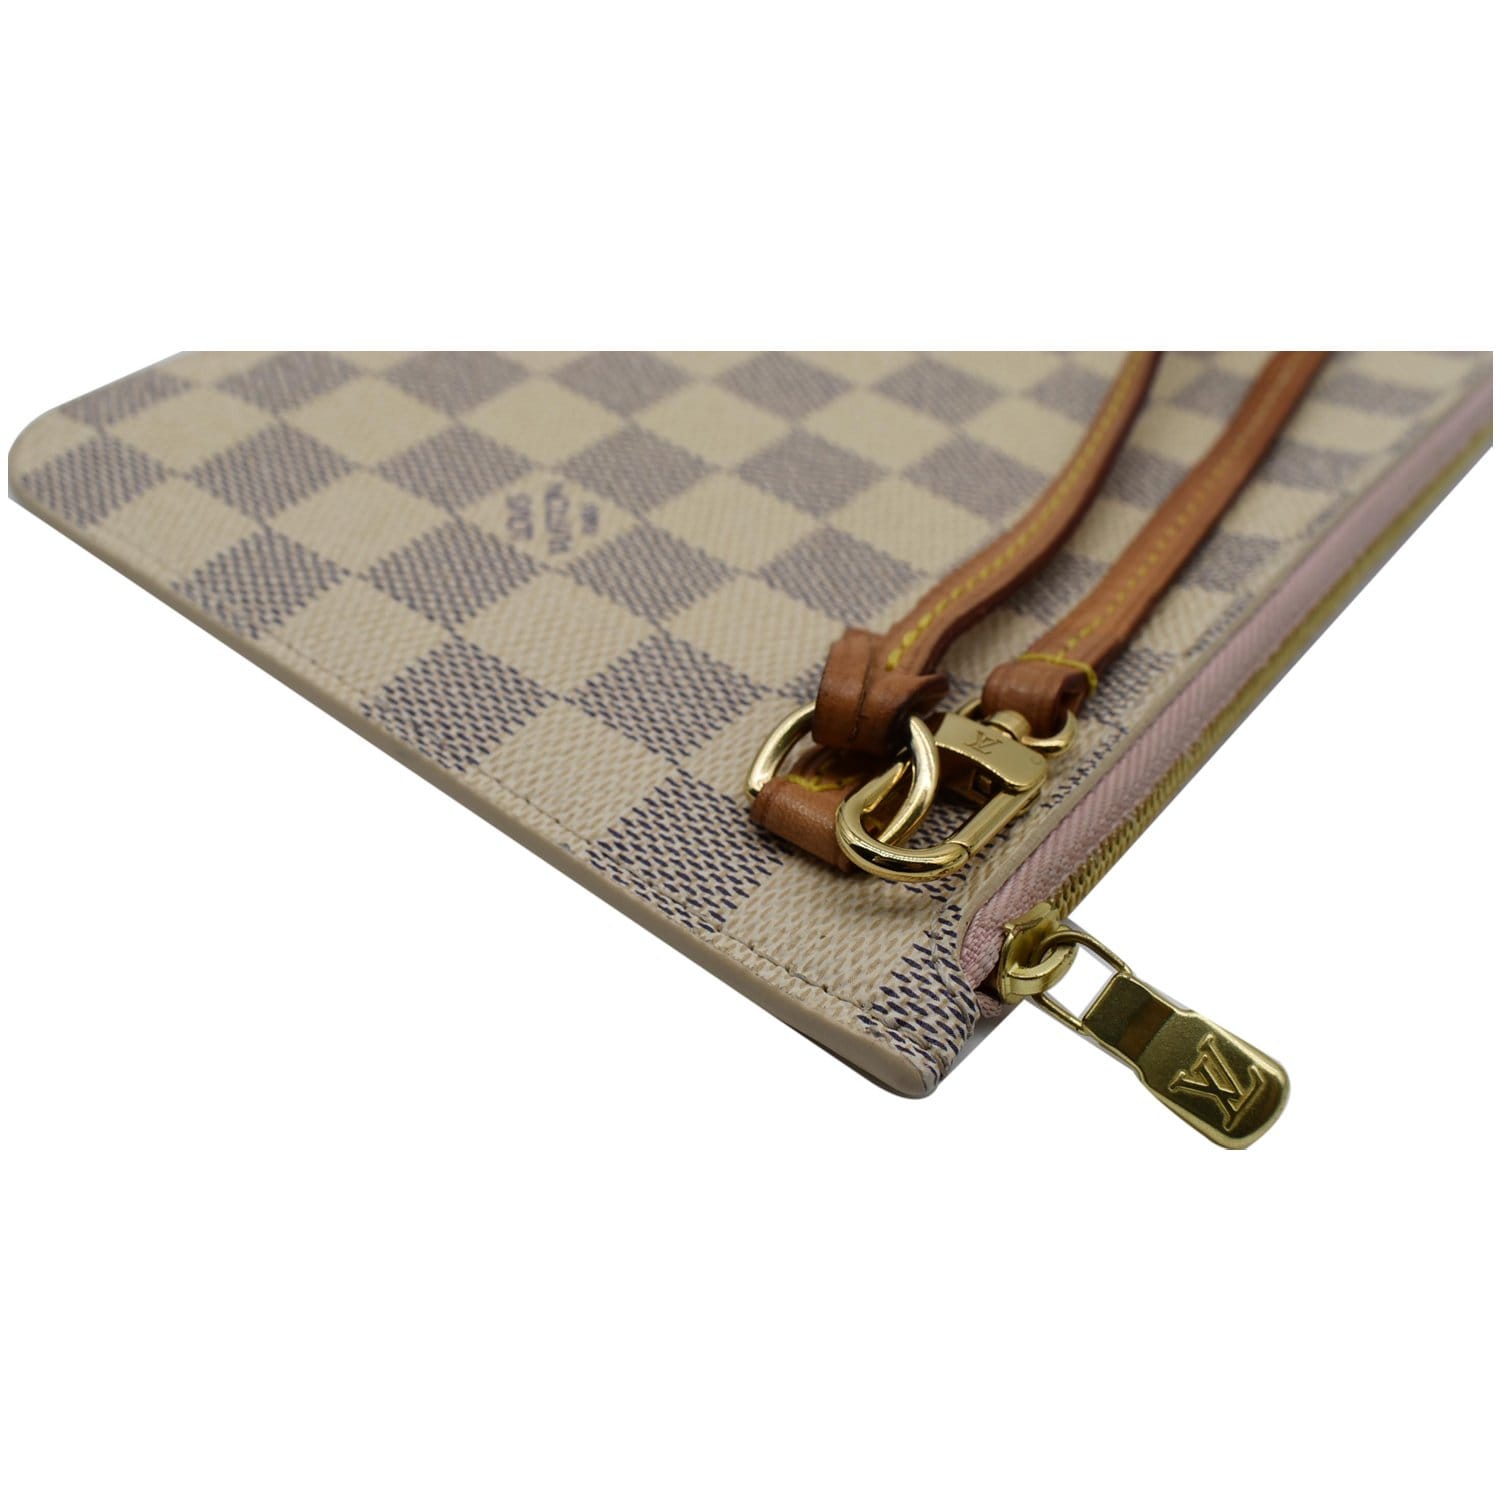 Louis Vuitton Damier Azur Neverfull GM with Pouch – Oliver Jewellery